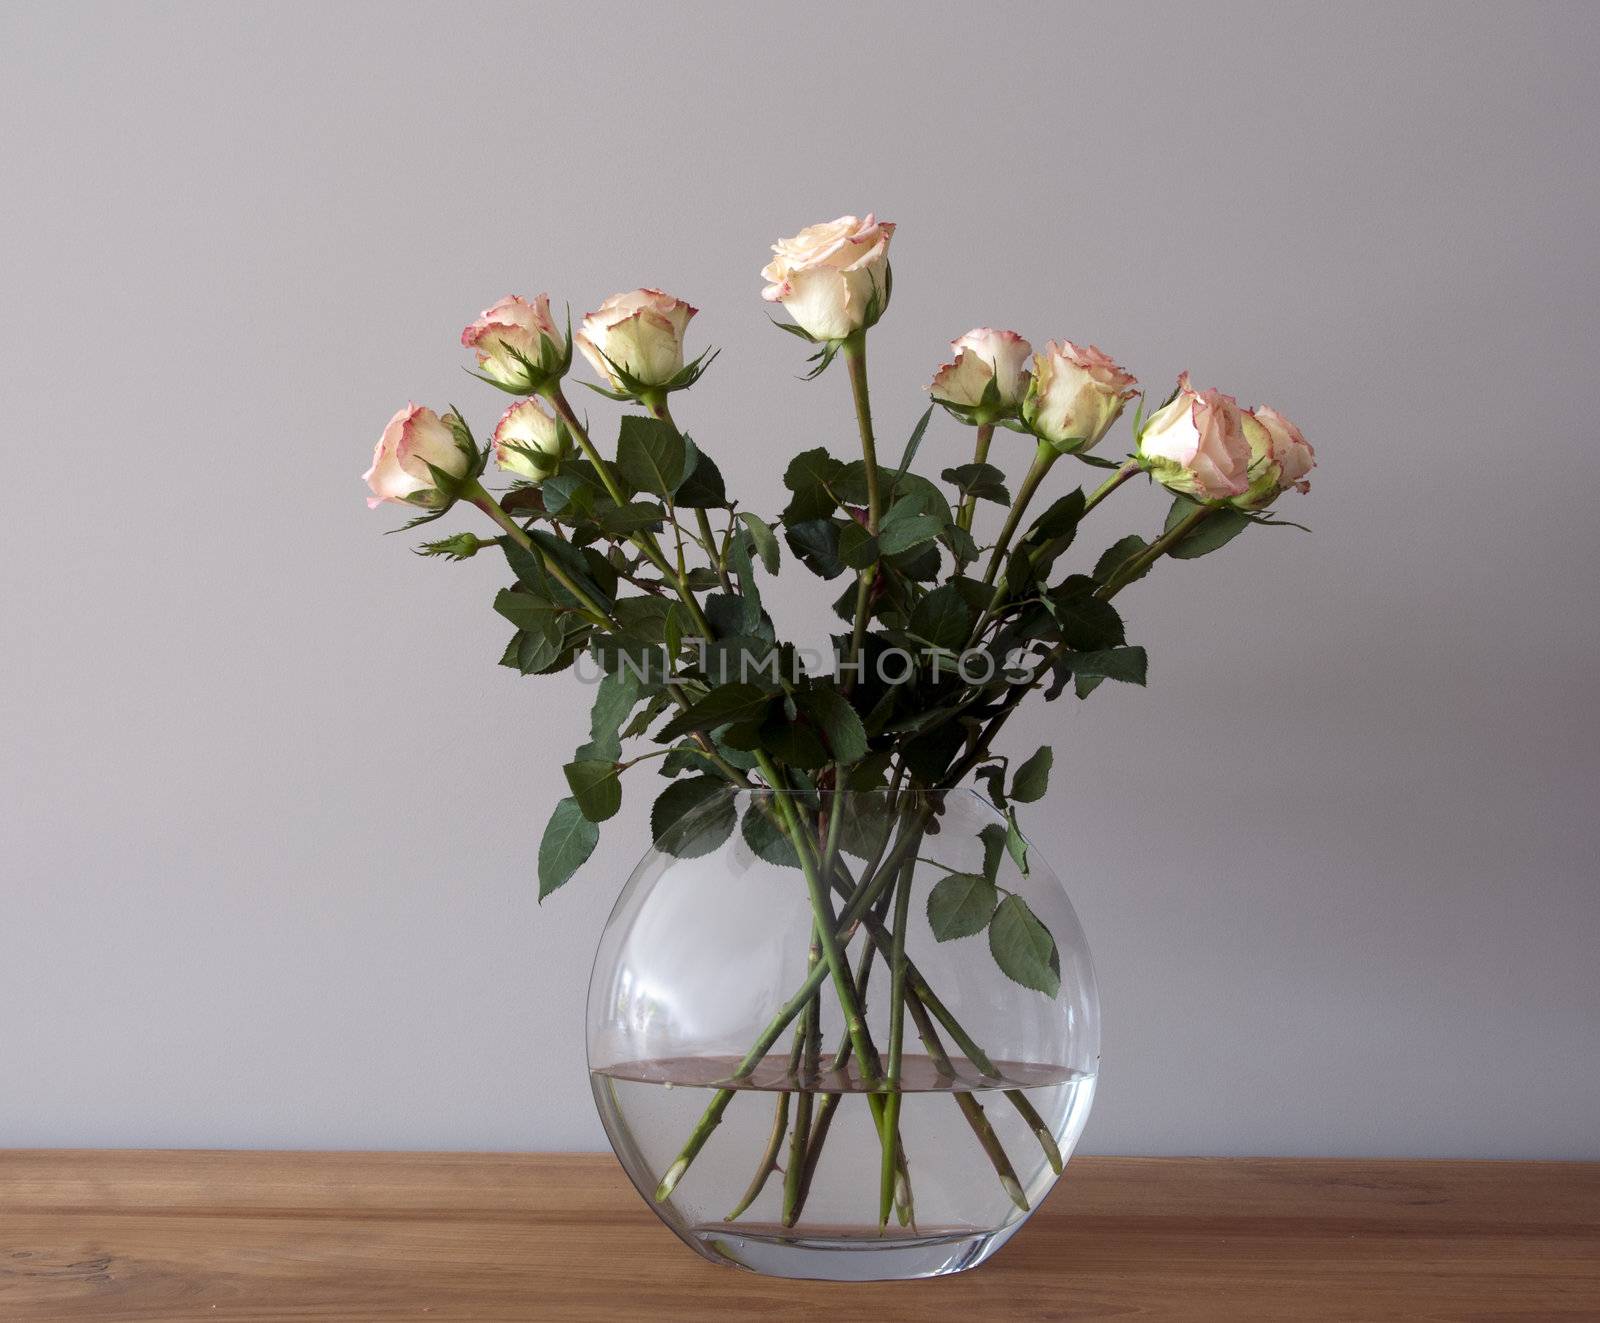 bouquest of roses in a vase by compuinfoto